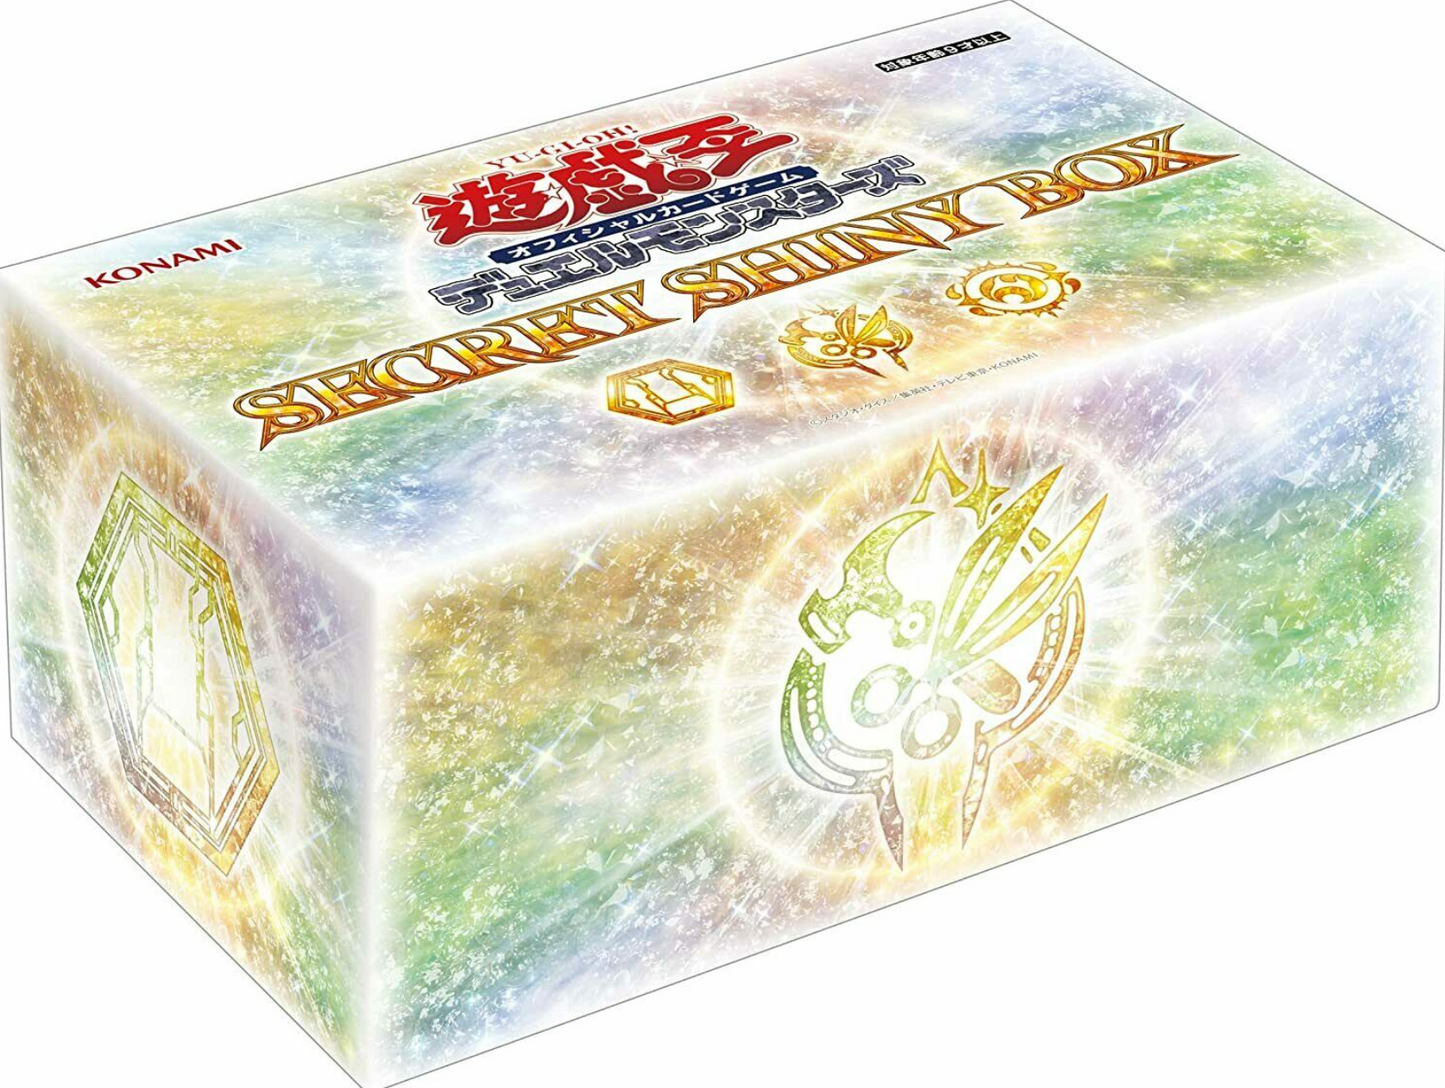 Yu-Gi-Oh Card Game Duel Monsters SECRET SHINY BOX limited Japanese